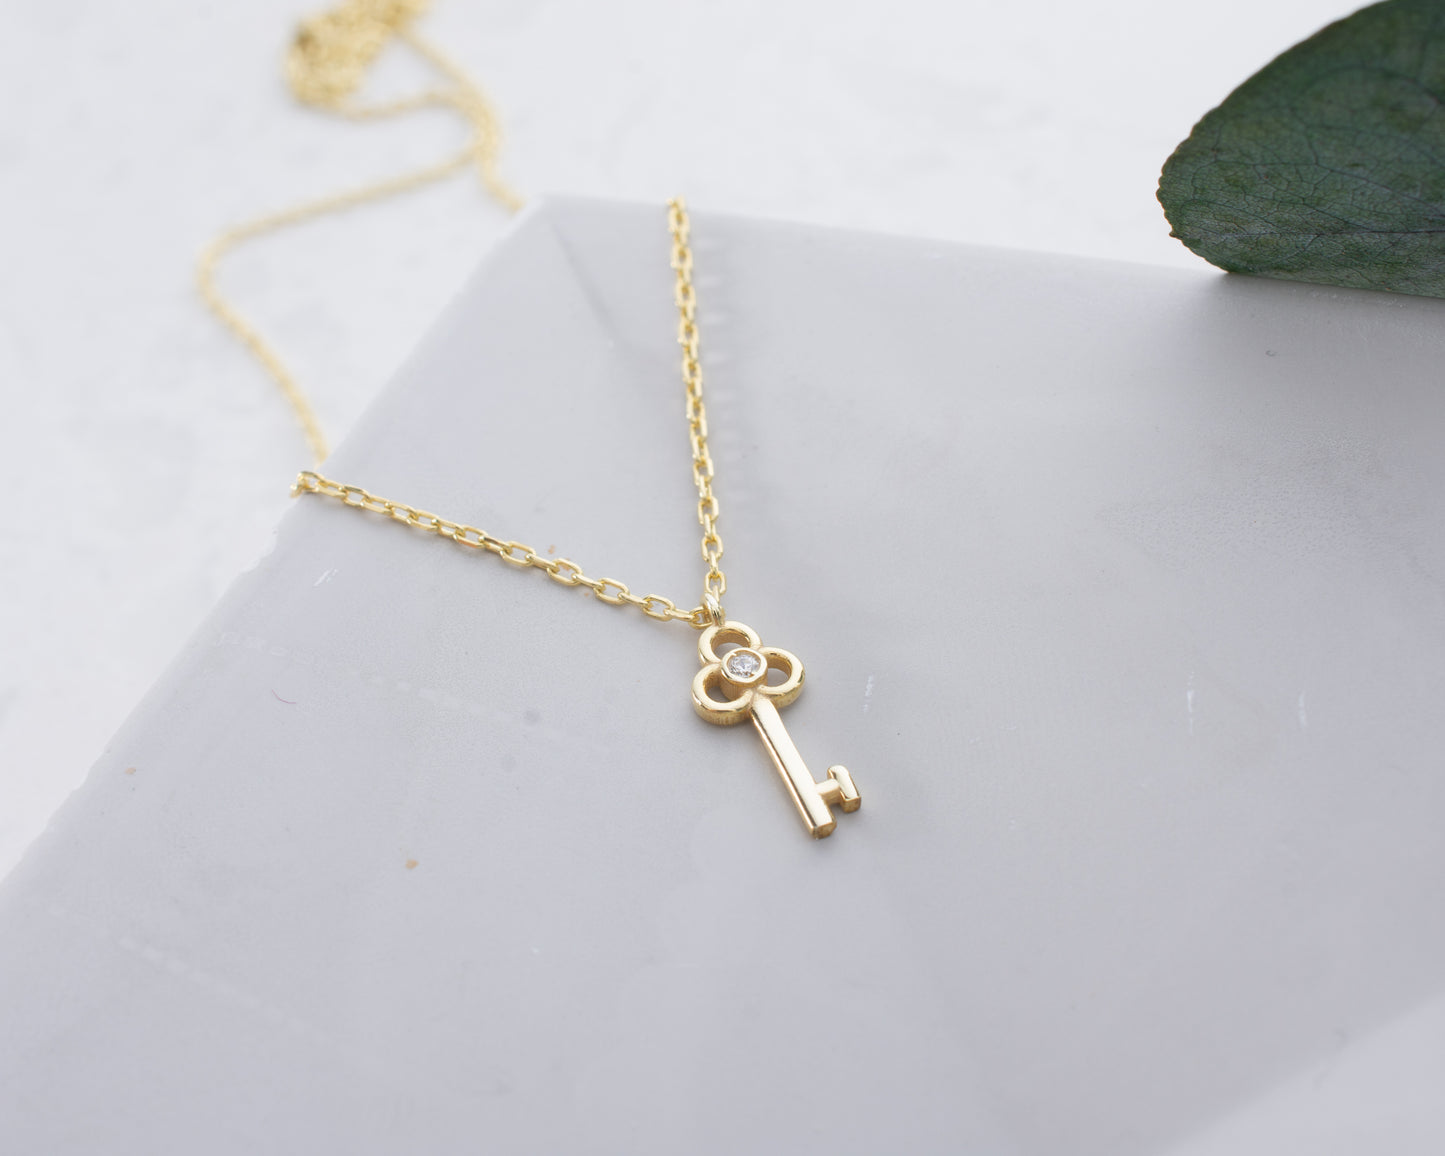 Solid Gold & Certified Diamond Key Necklace